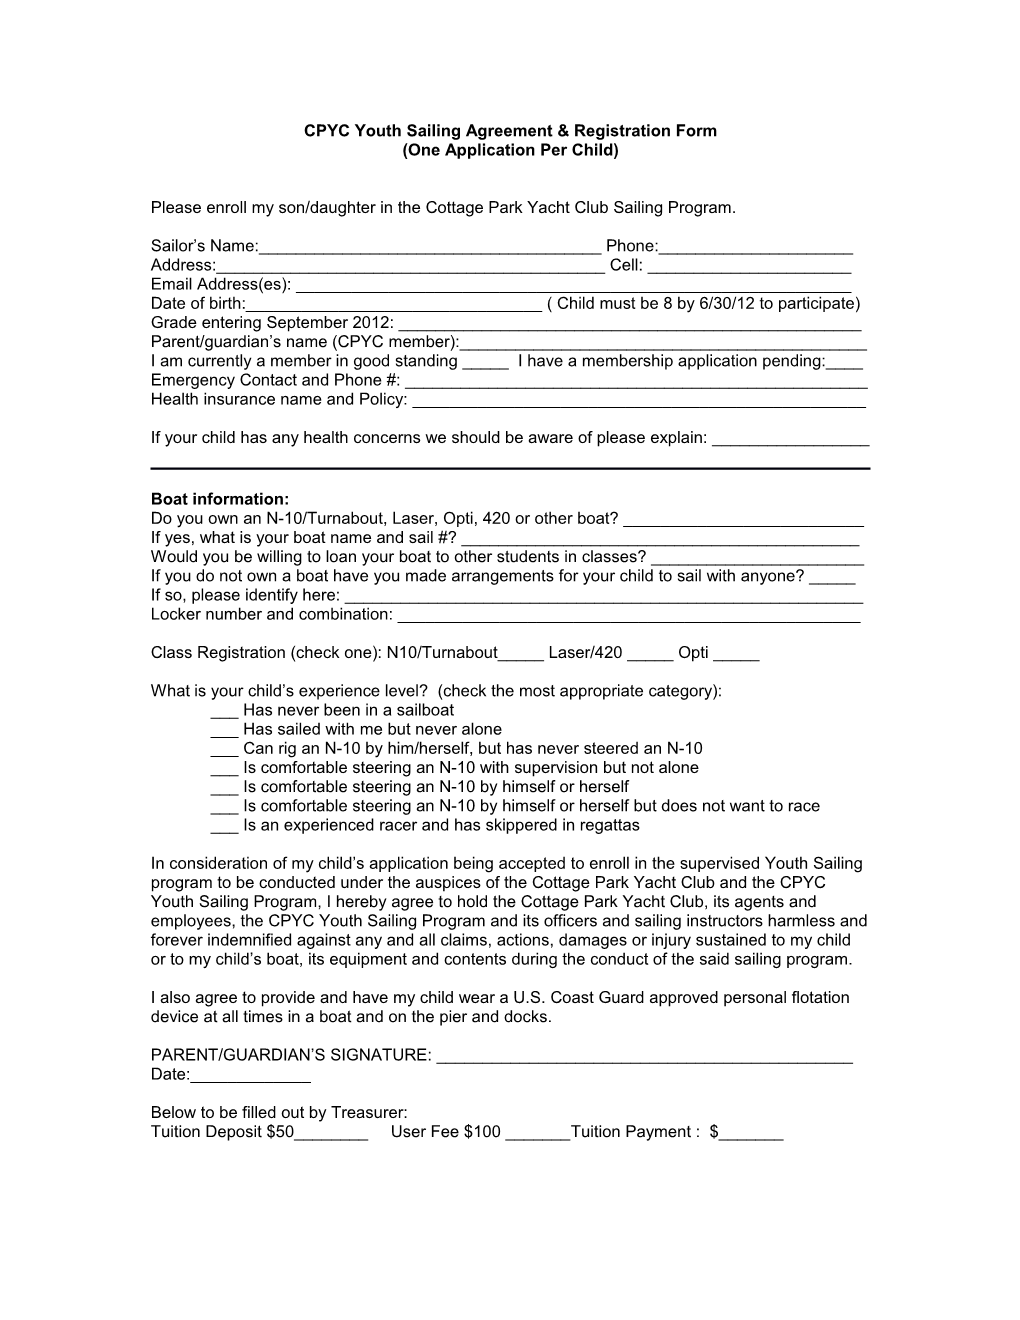 CPYC Youth Sailing Agreement & Registration Form